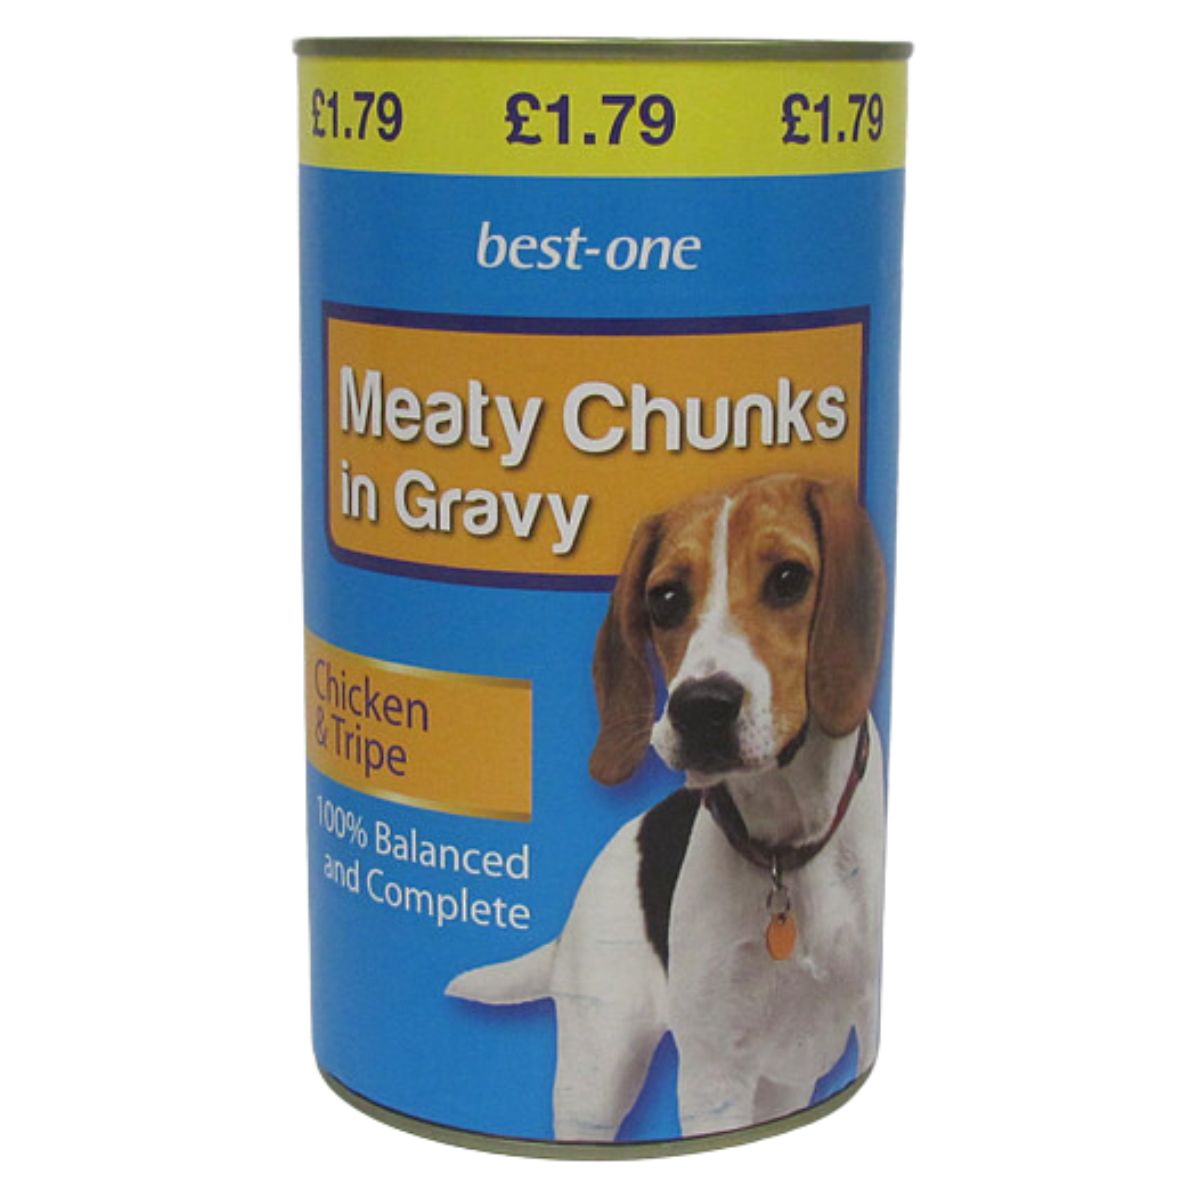 A can of Best One - Dog Chicken & Tripe - 1.2kg chunks in gravy.